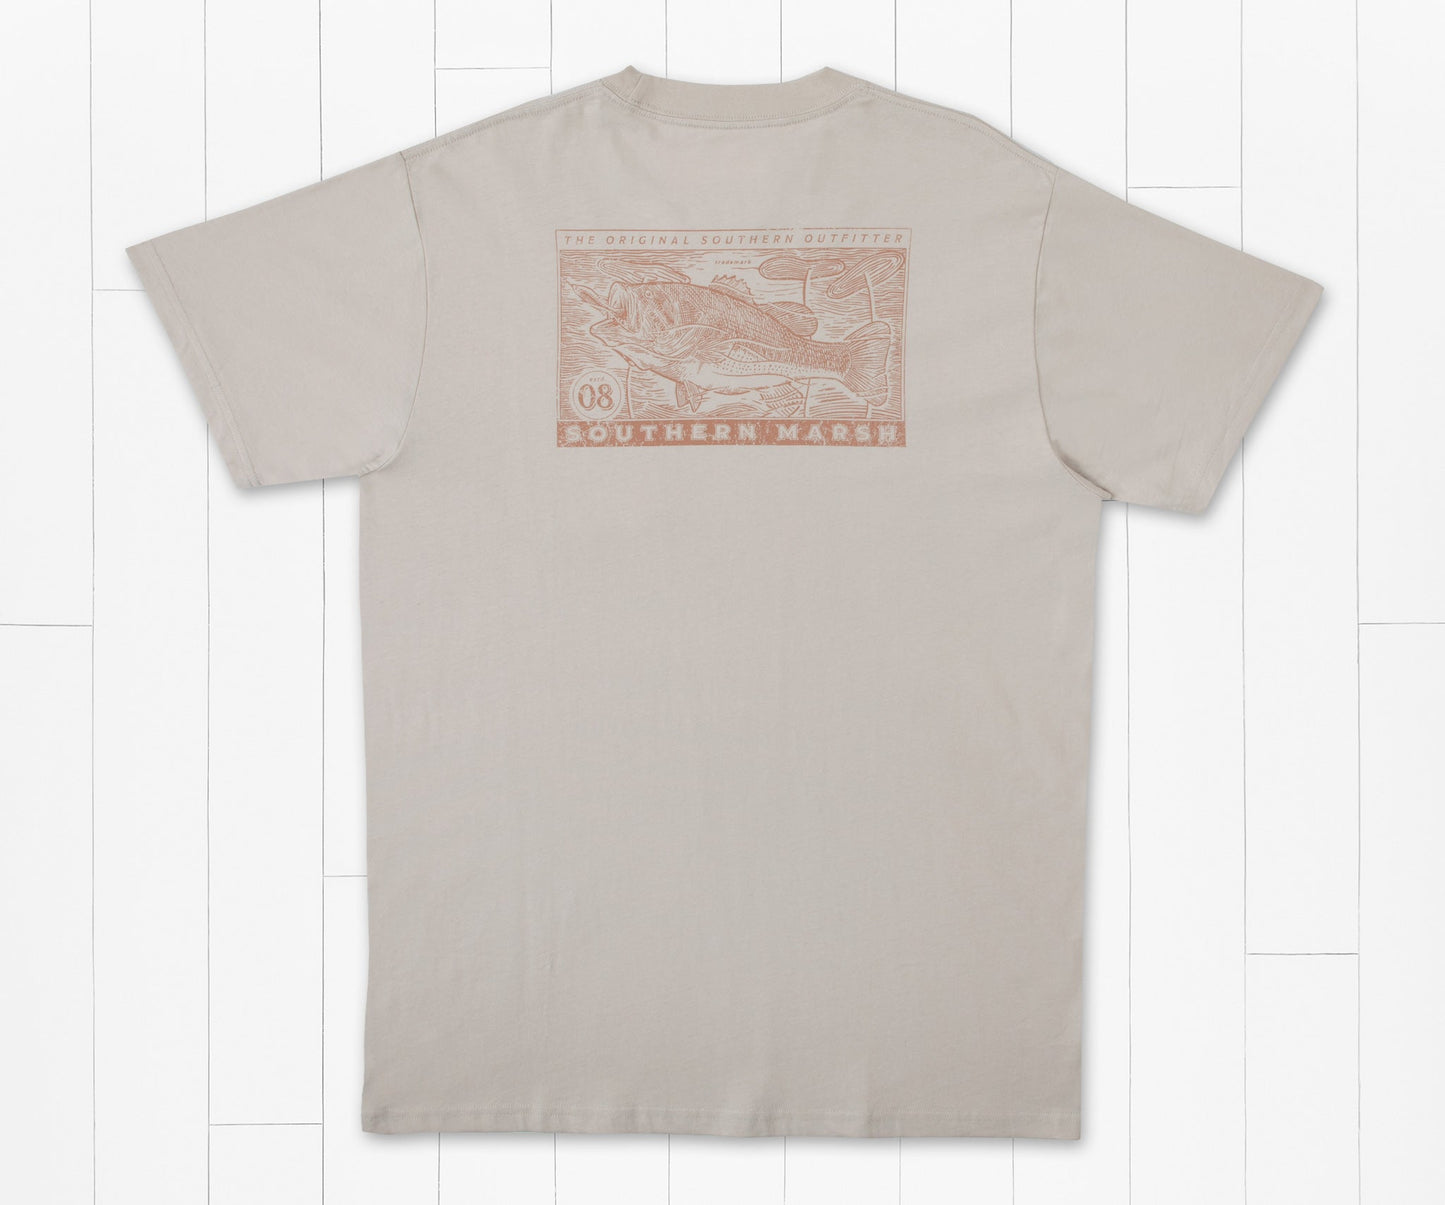 Southern Marsh Etched Bass Tee